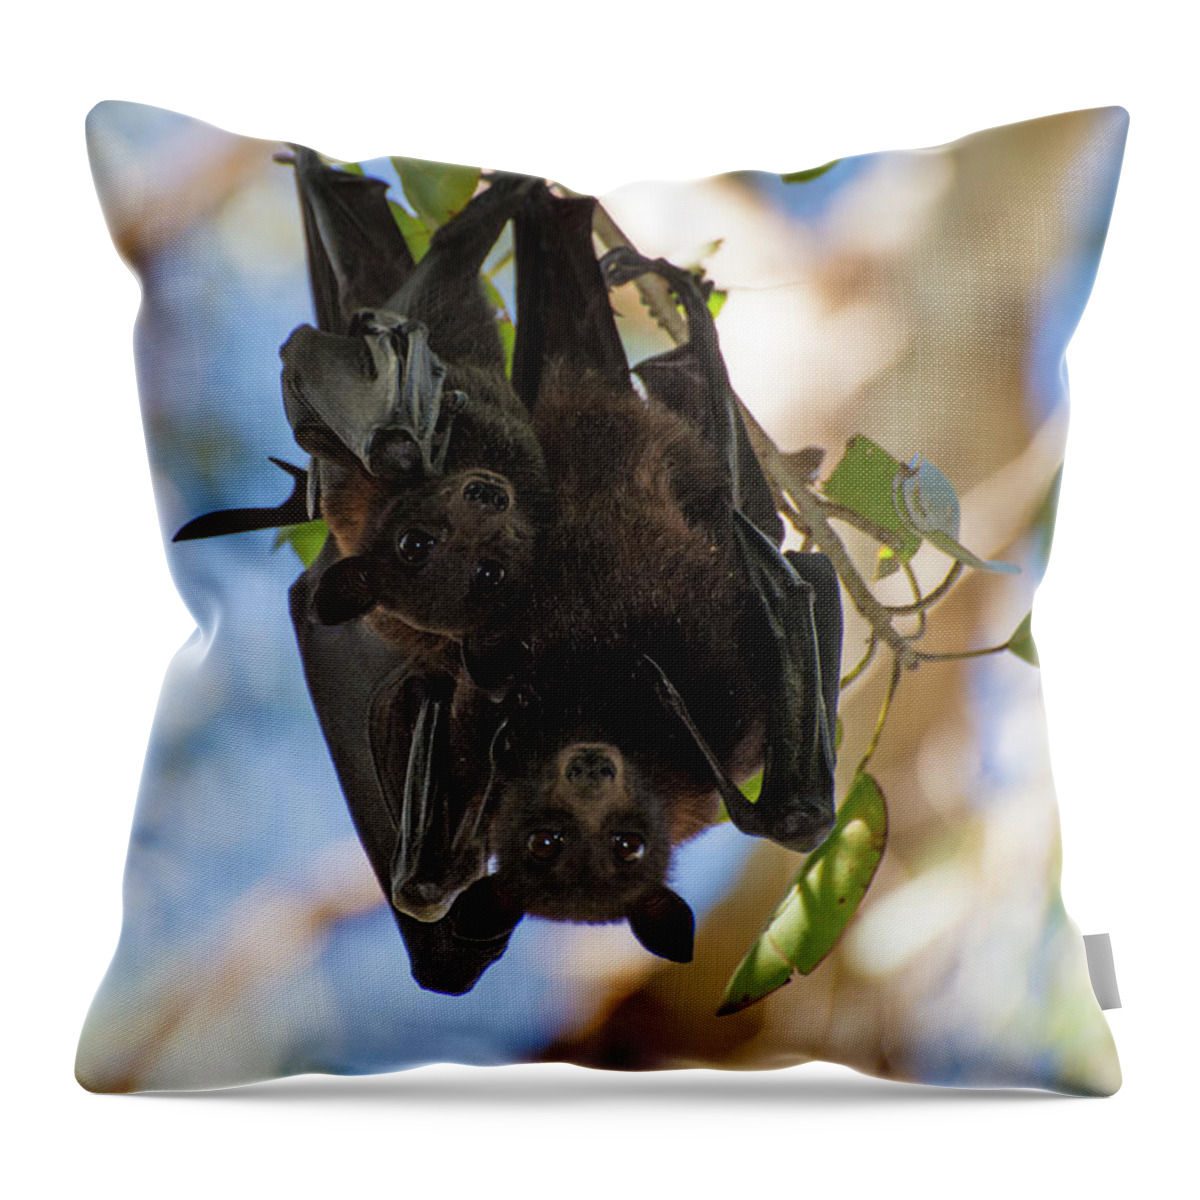 Flying Fox Throw Pillow featuring the photograph Hang Time by John Coffey